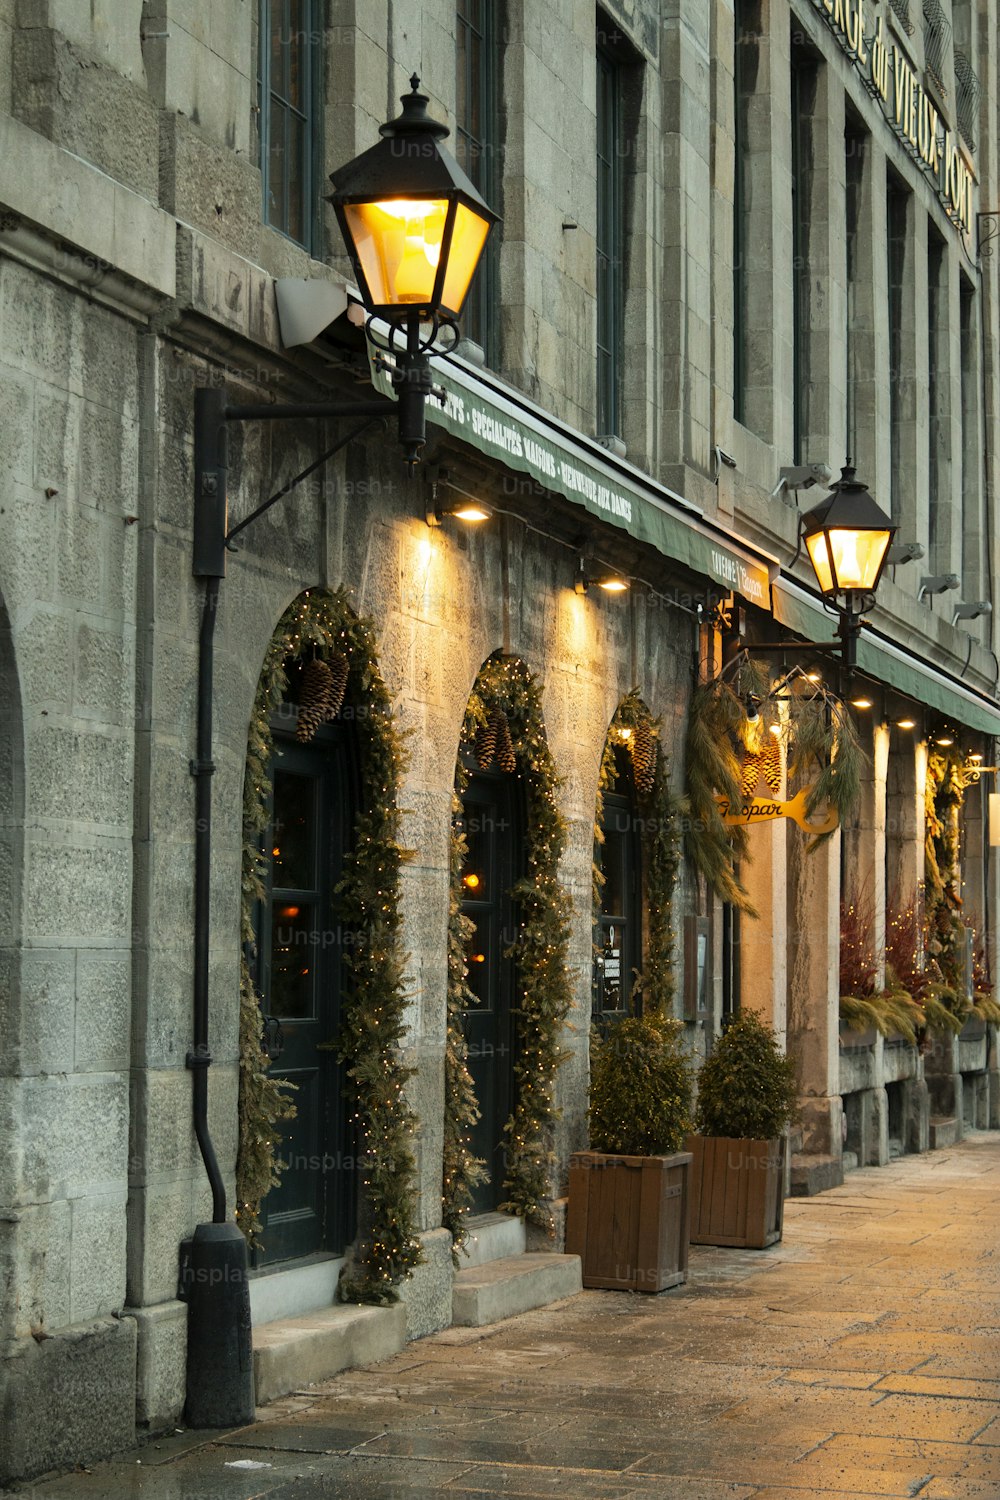 Street Scene with lamps. Outdoor shots of Montreal in the wintertime.